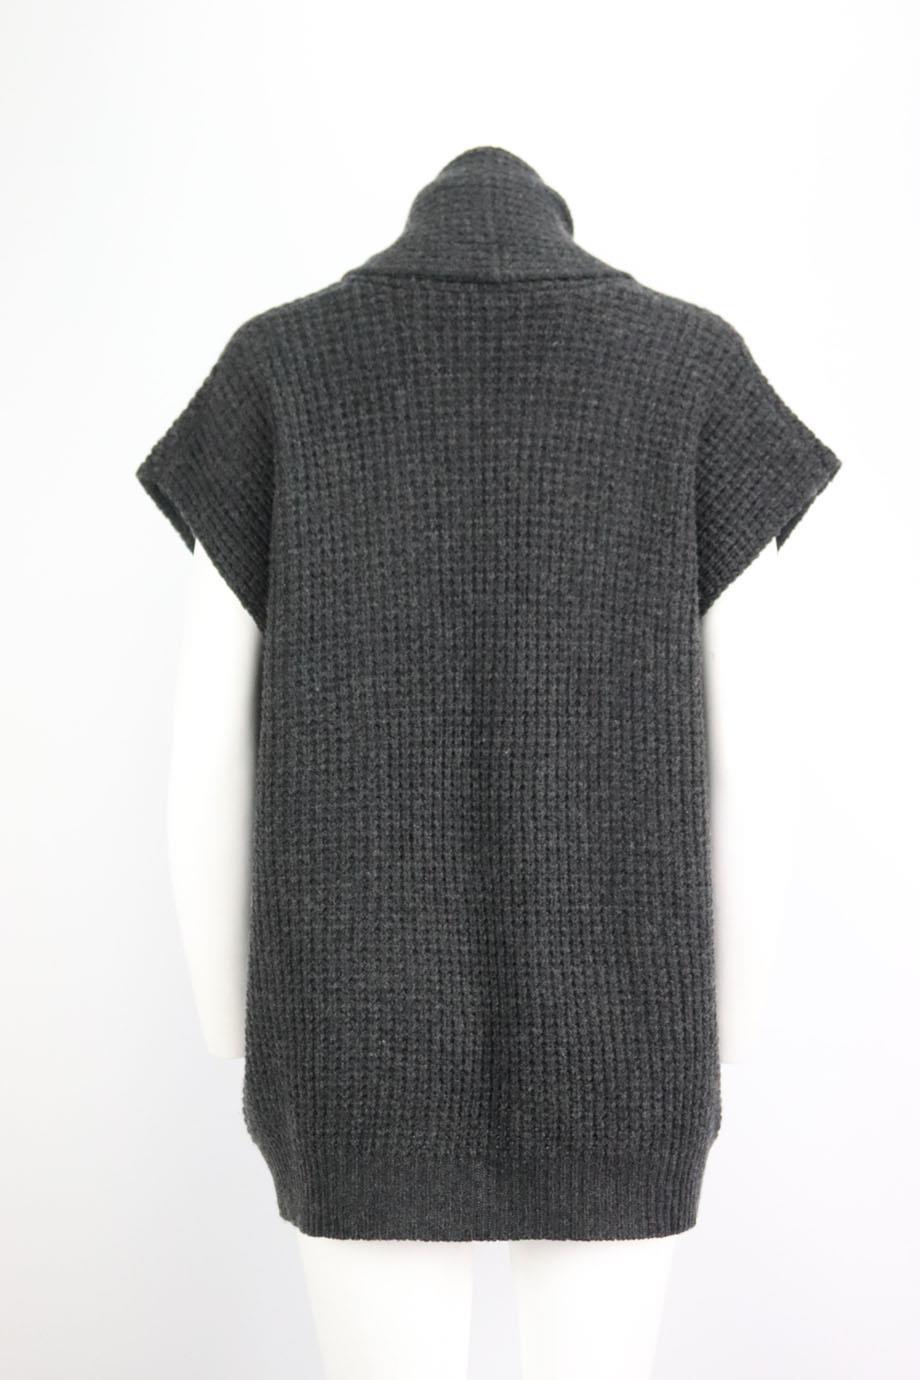 Black Eres Waffle Knit Wool And Cashmere Blend Cardigan Small/Medium